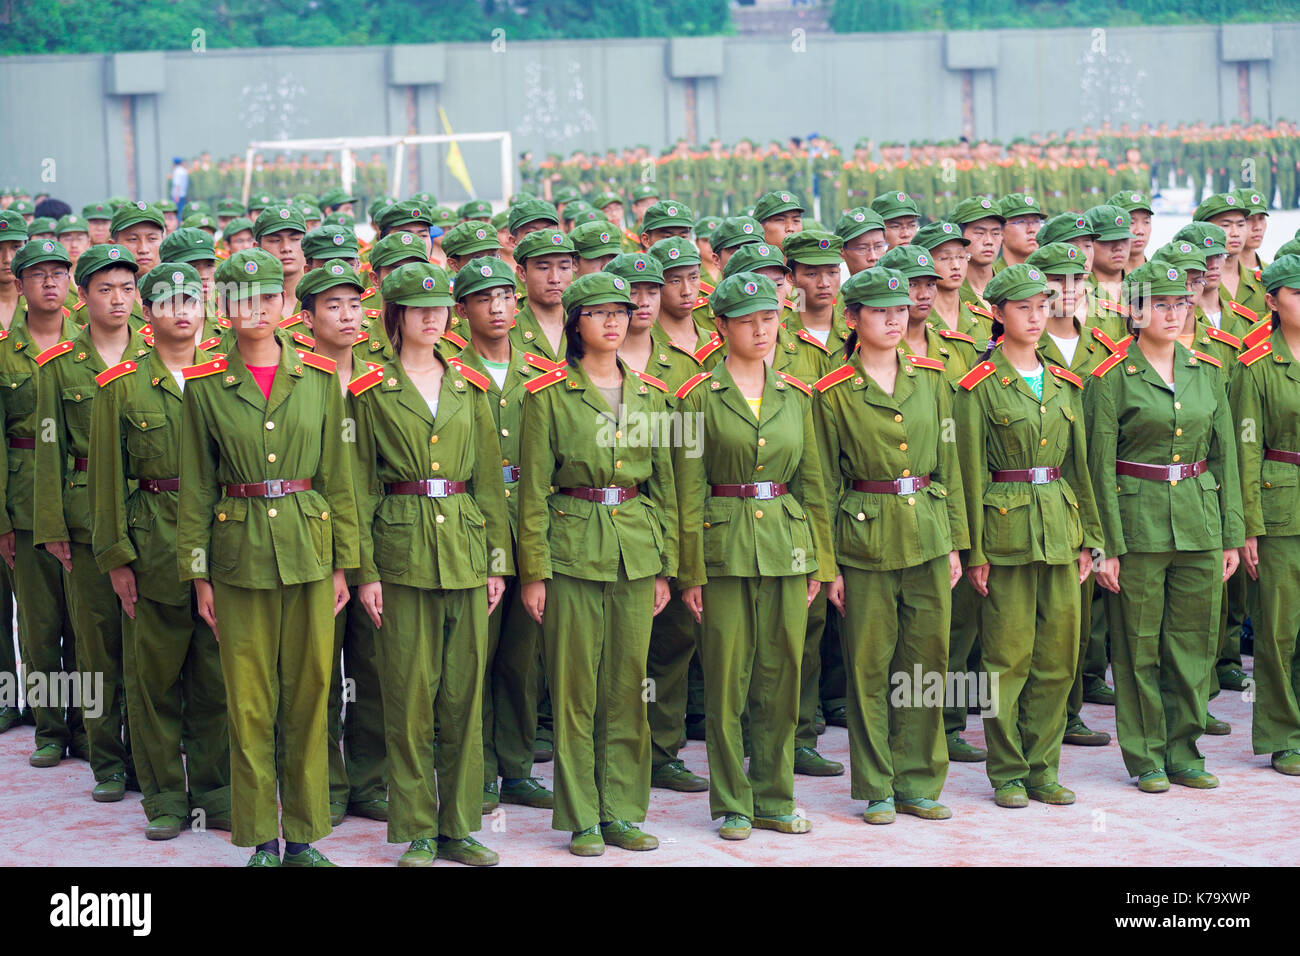 Changsha, China - September 5, 2007: Male and female Chinese university students in green uniforms line up in formation for compulsory military traini Stock Photo